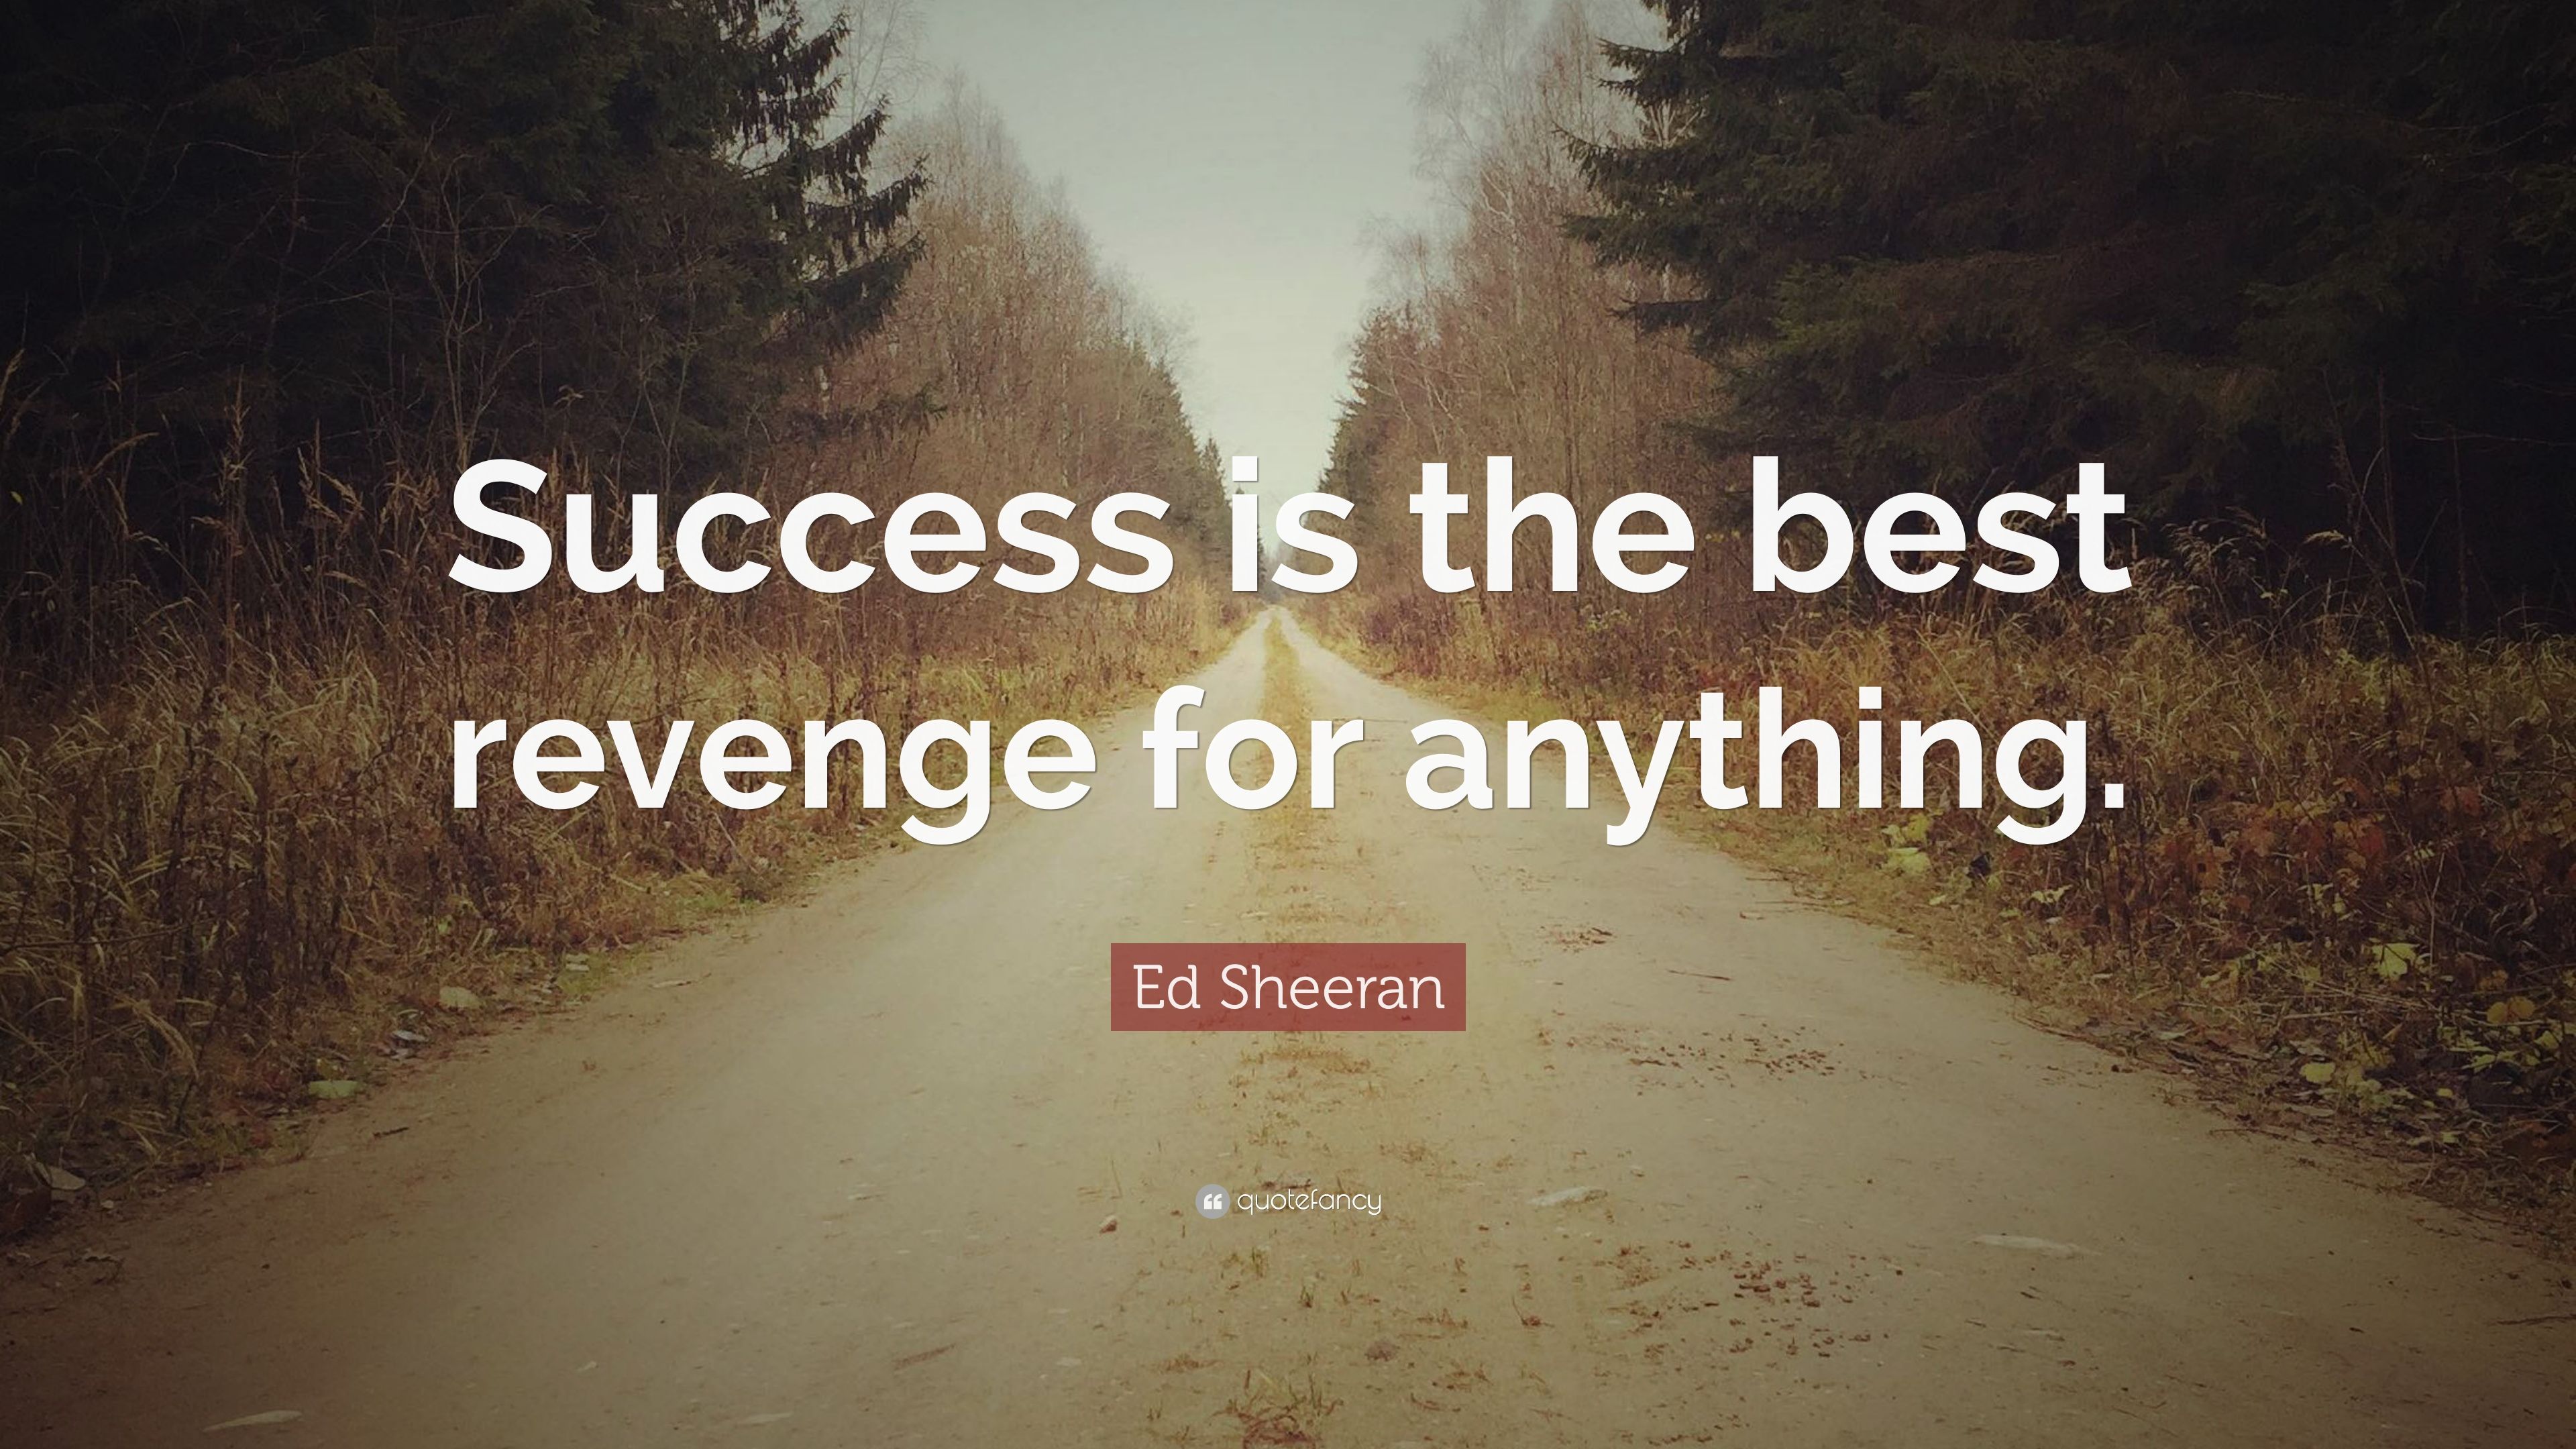 Ed Sheeran Quote: “Success is the best revenge for anything.” 12